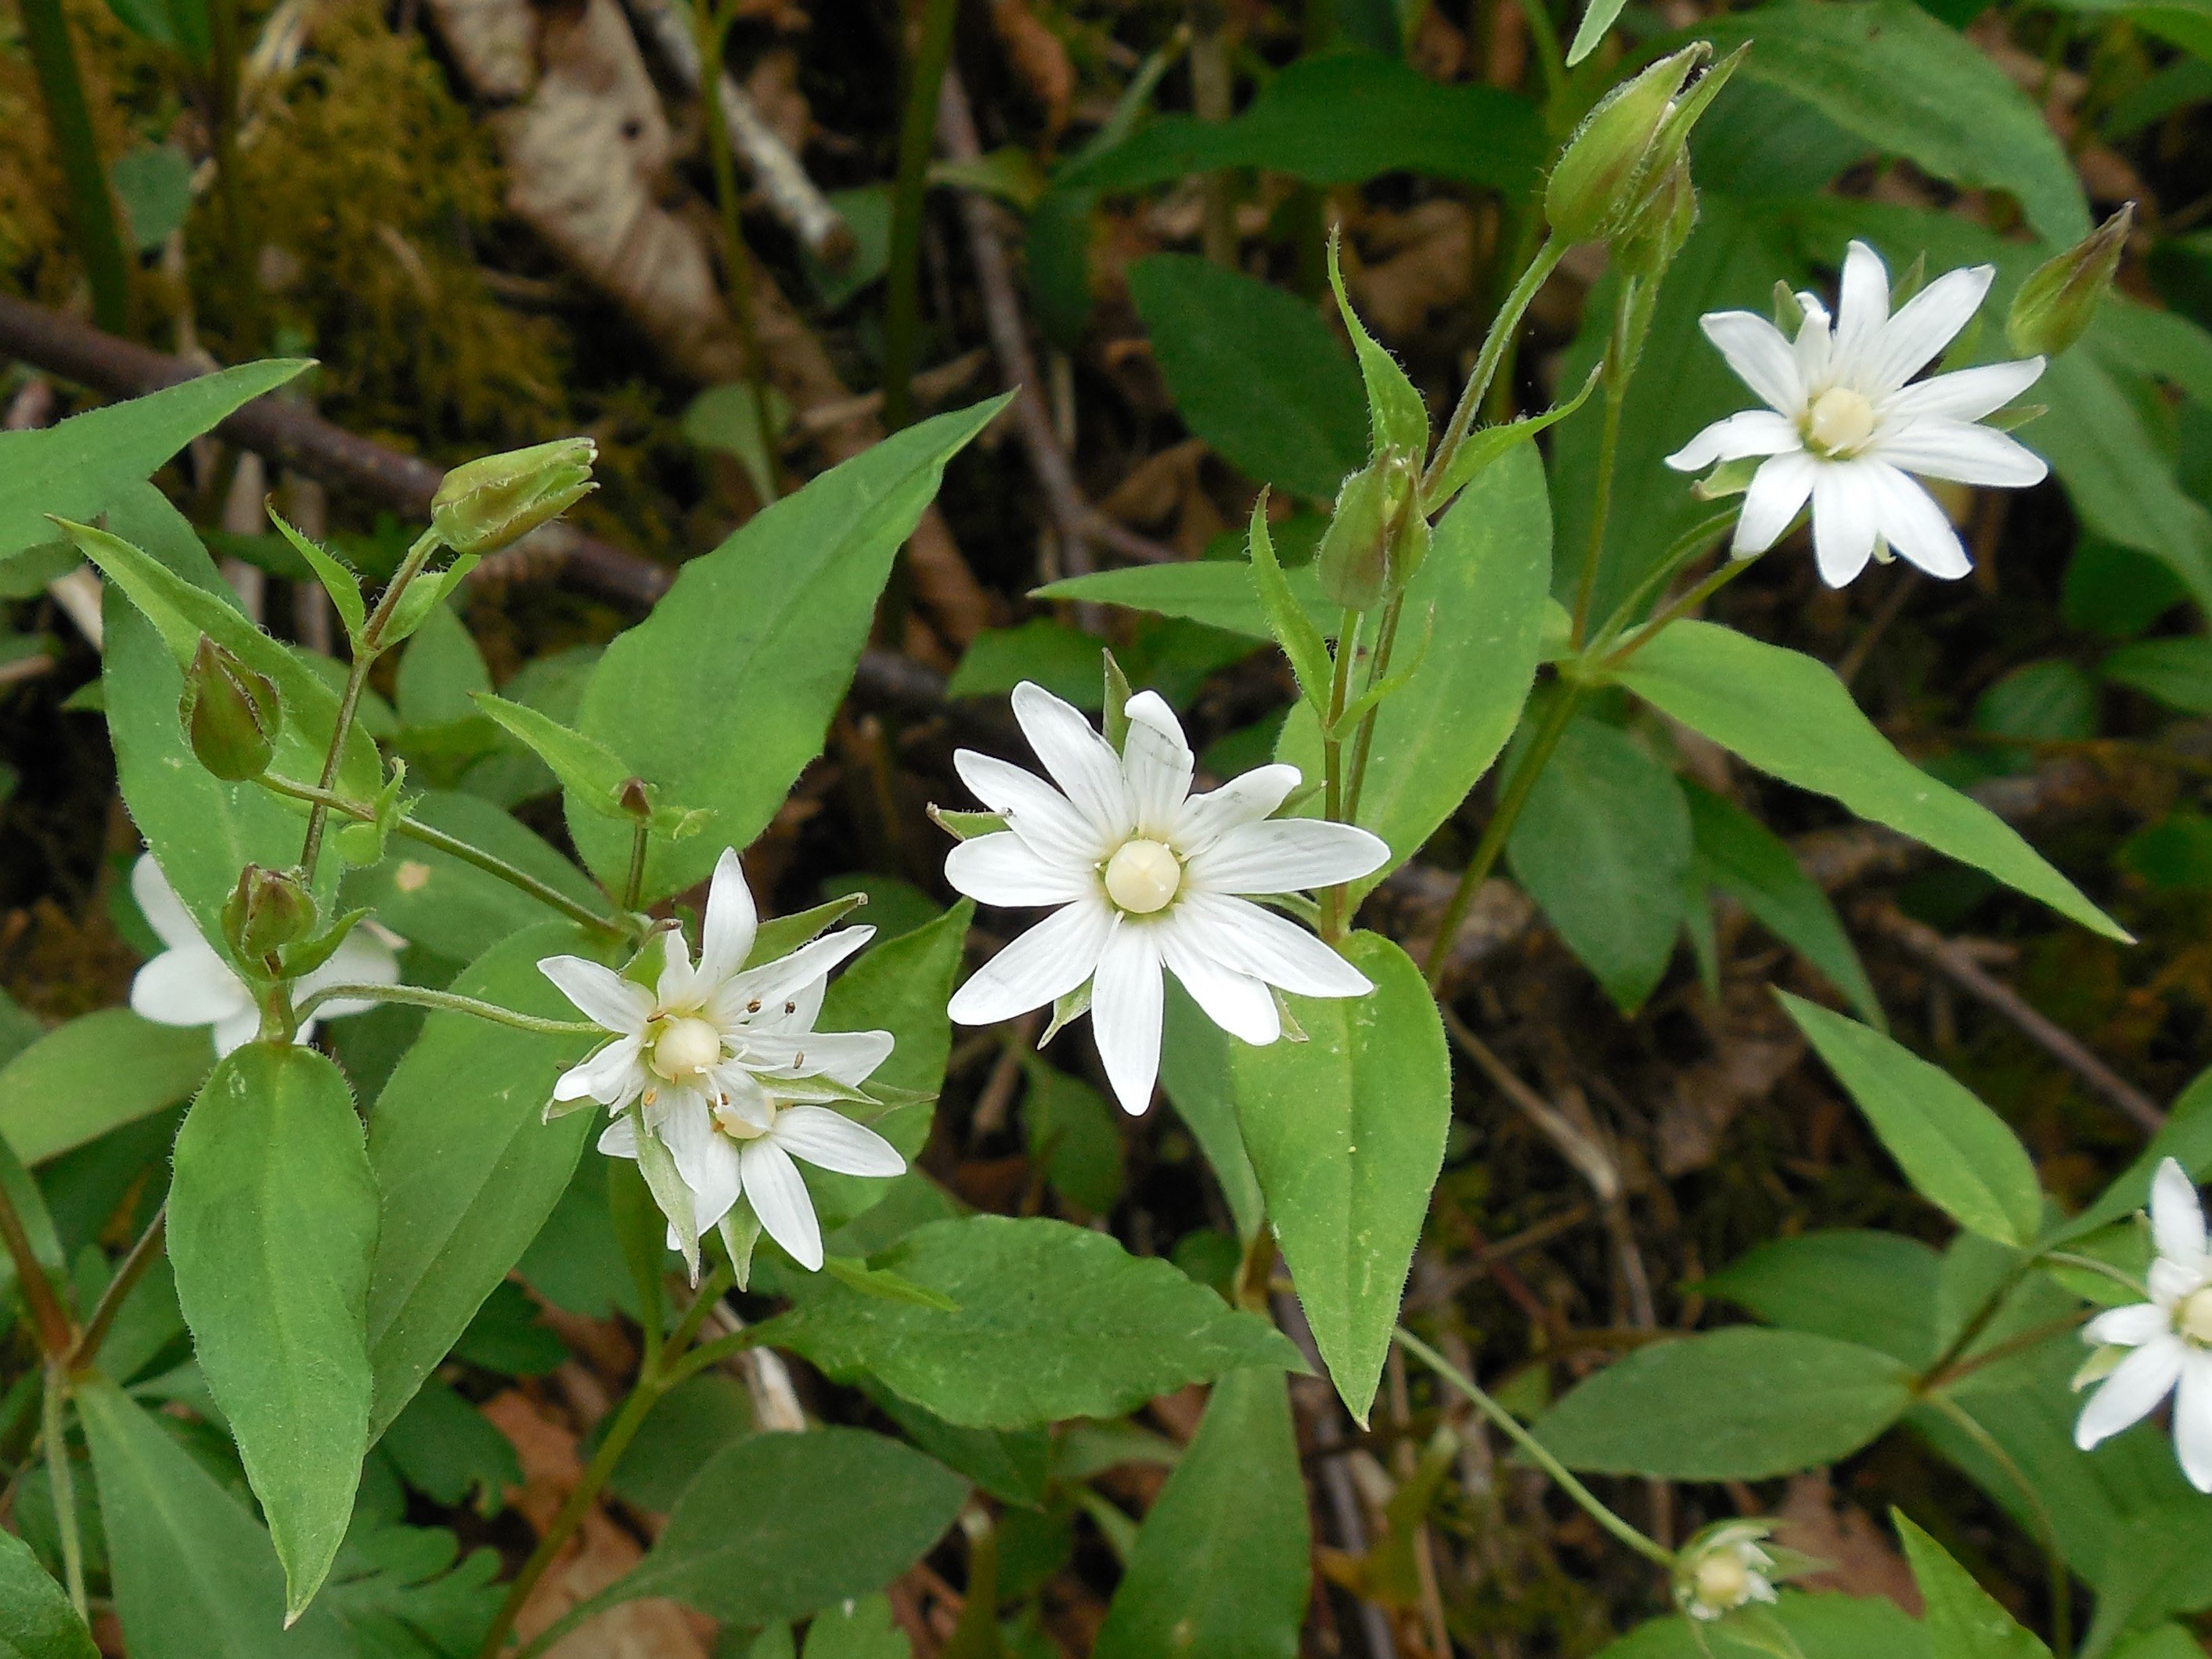 The Scientific Name is Stellaria corei. You will likely hear them called Tennessee Starwort. This picture shows the Spreads by creeping stems. Long sepals extending past the 5 white split petals. of Stellaria corei